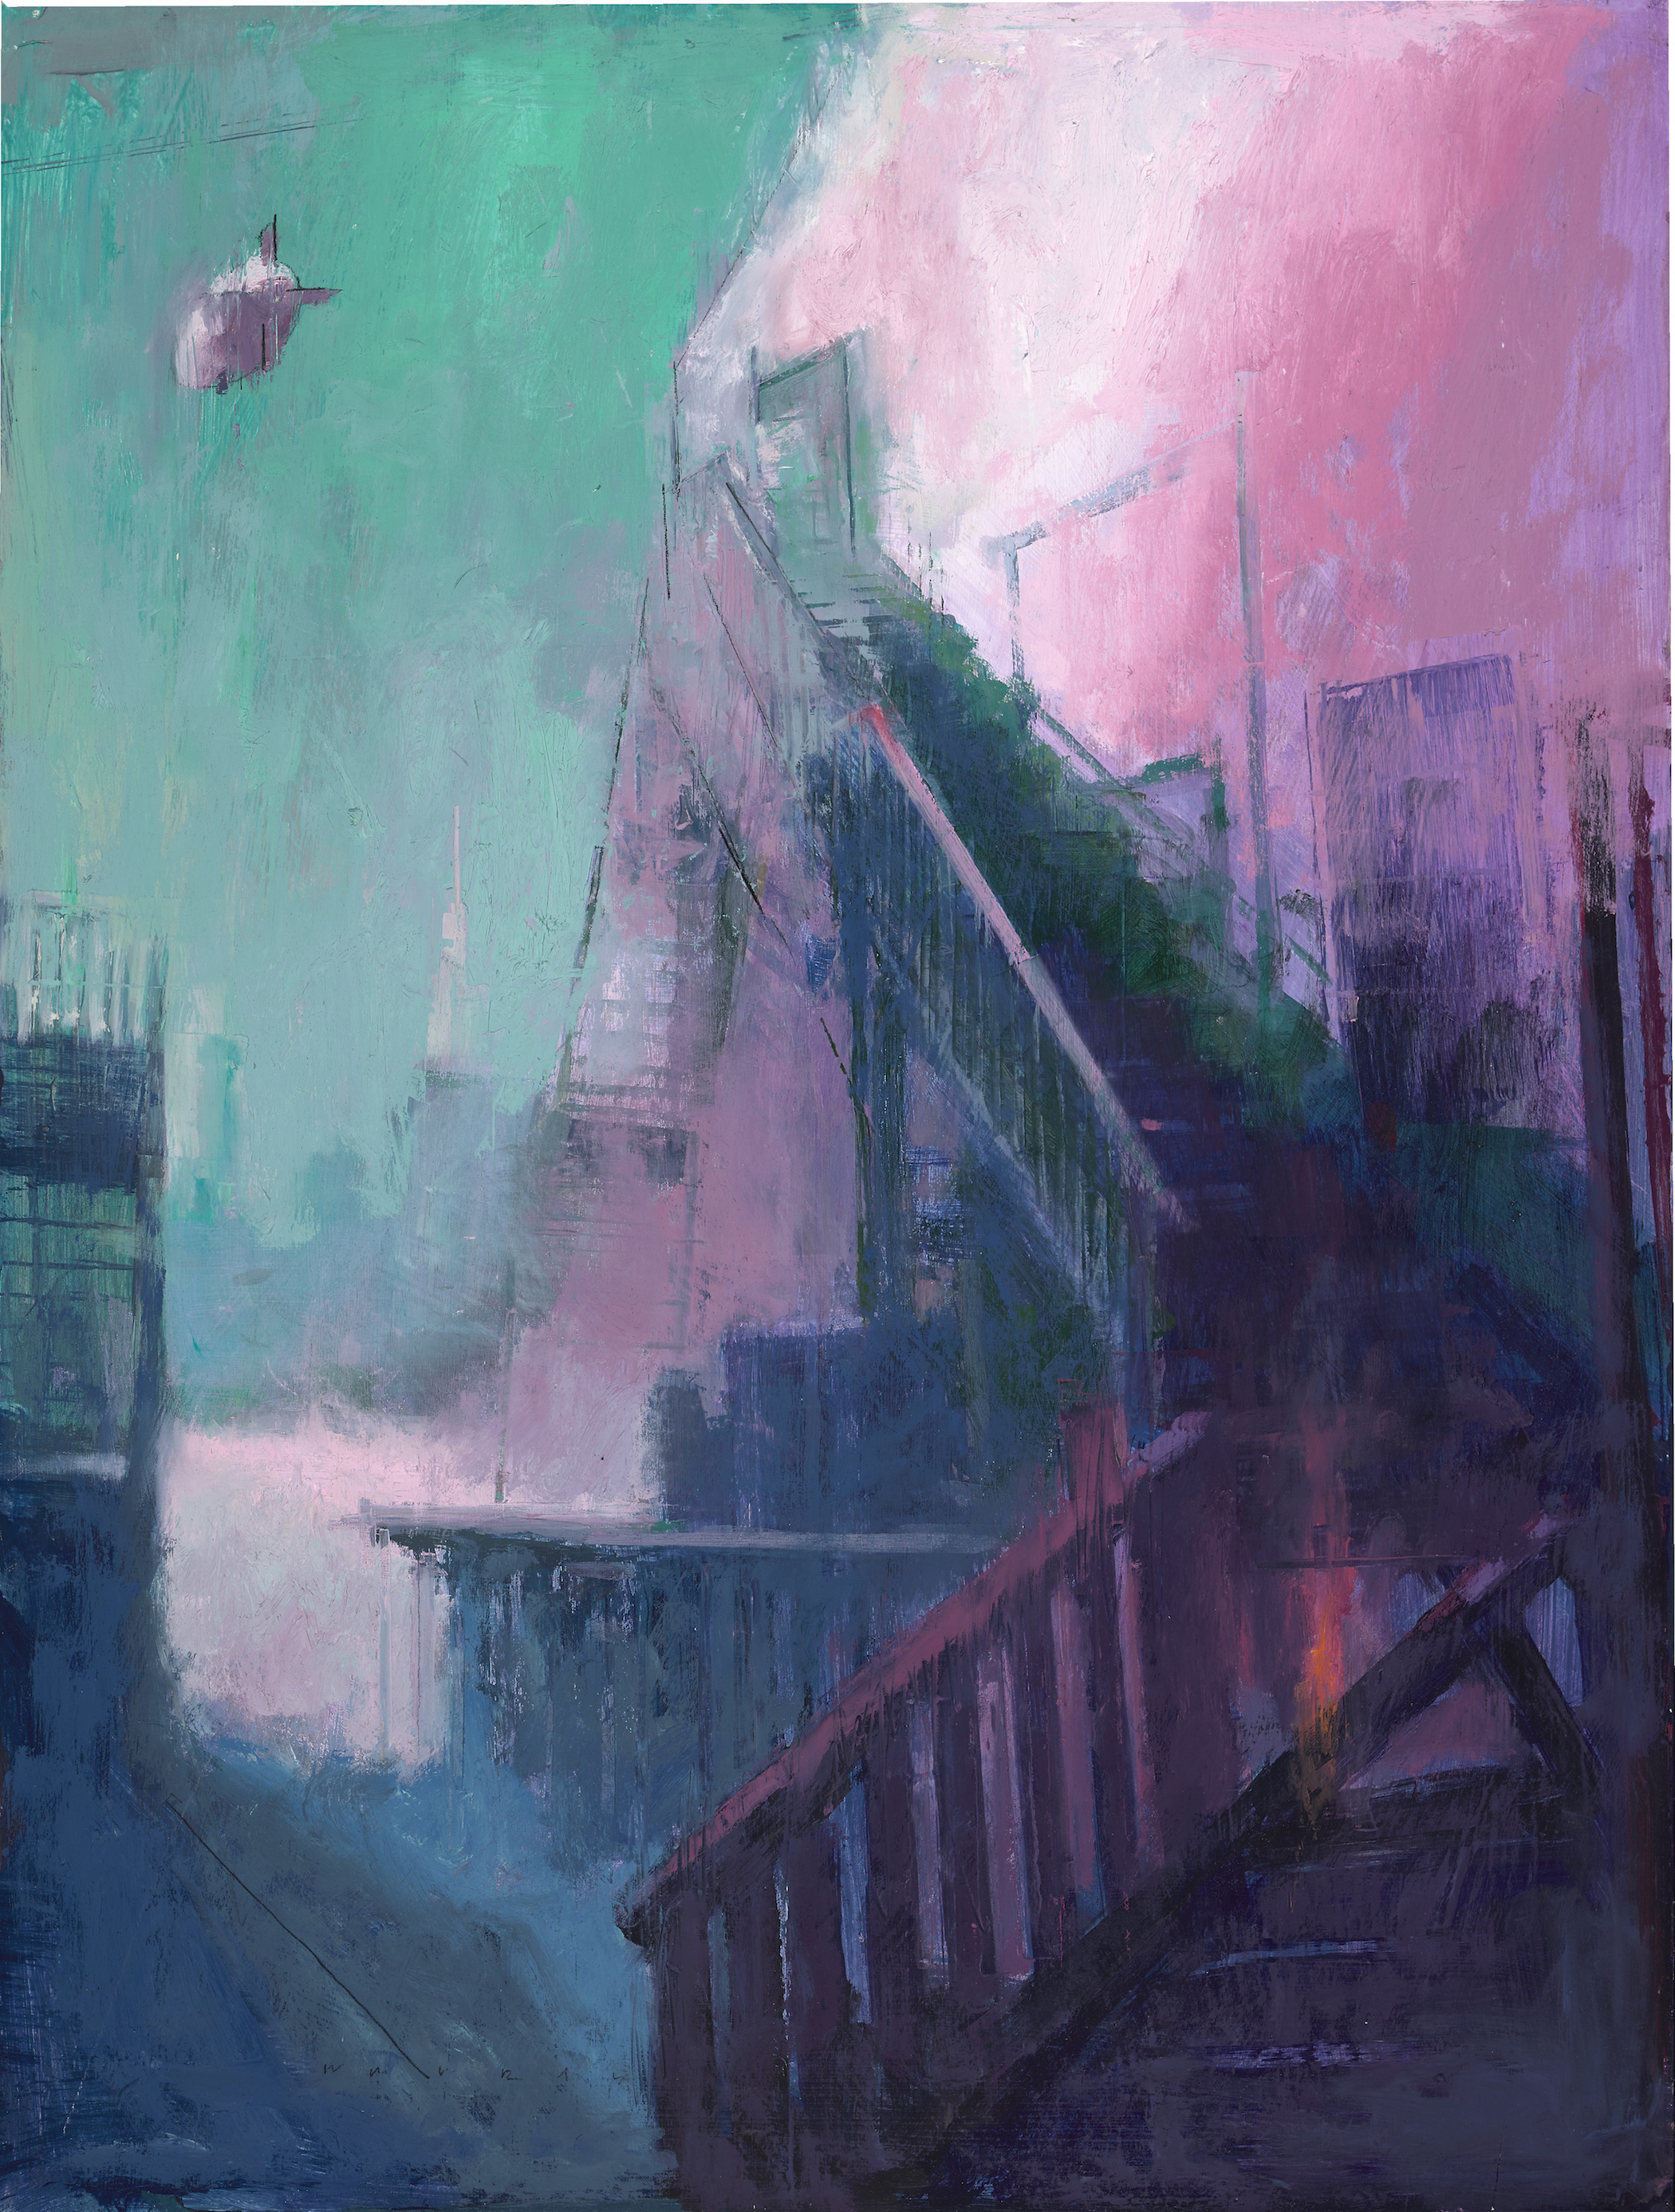 "Passing Over Chinatown" by William Wray, featured in the California Art Club's 107th Annual Gold Medal Exhibition